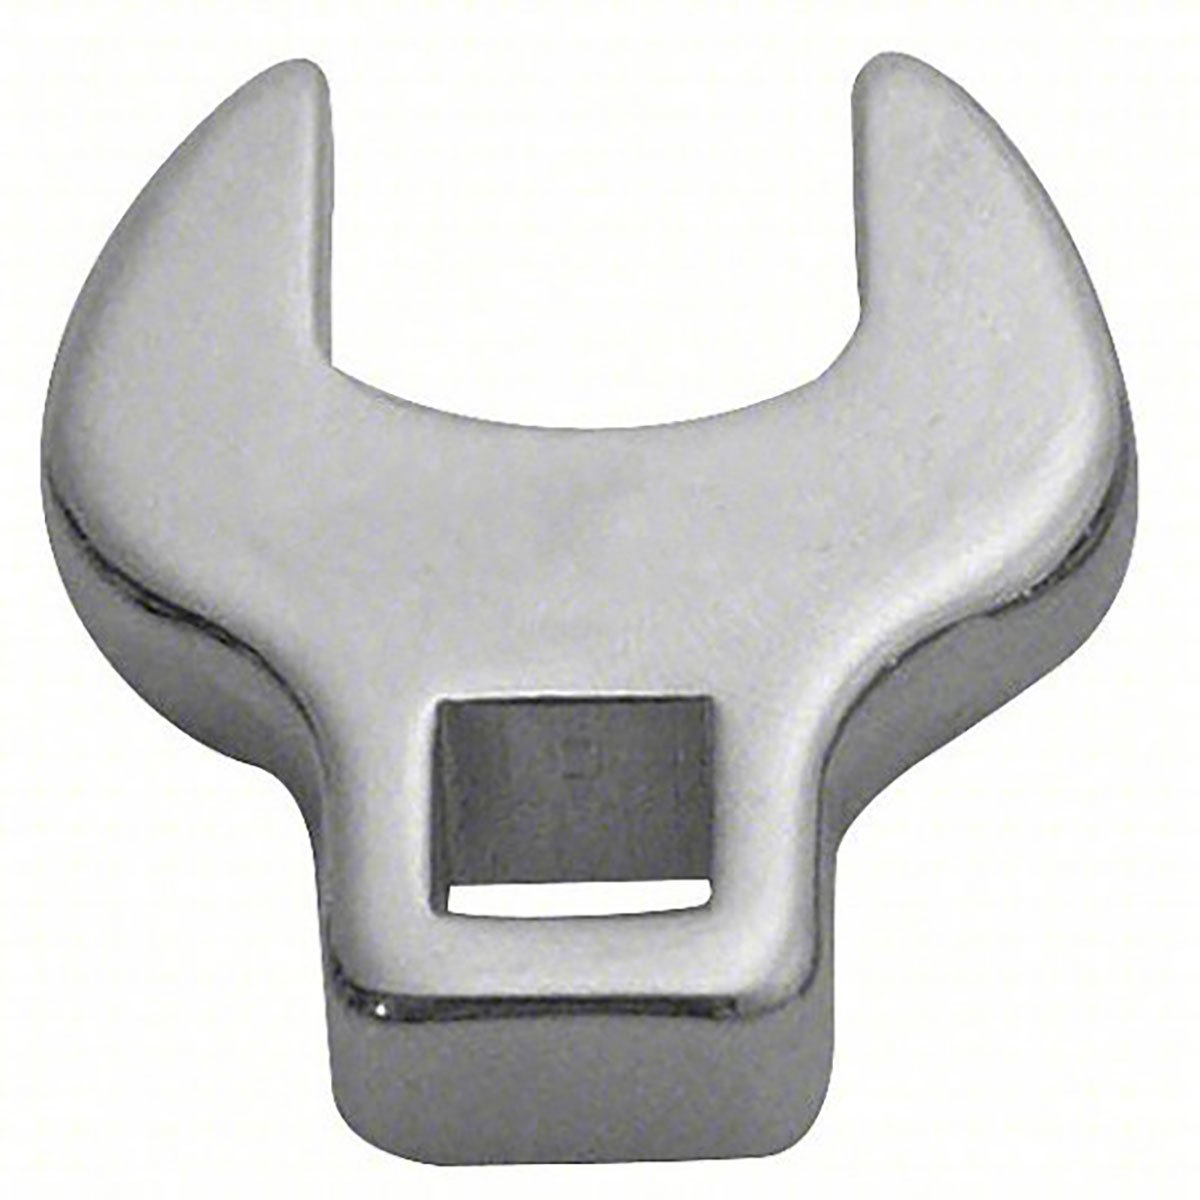 BROWNELLS - 1EYP6 1-3/4" LENGTH 3/8" DRIVE SIZE CROWFOOT WRENCH